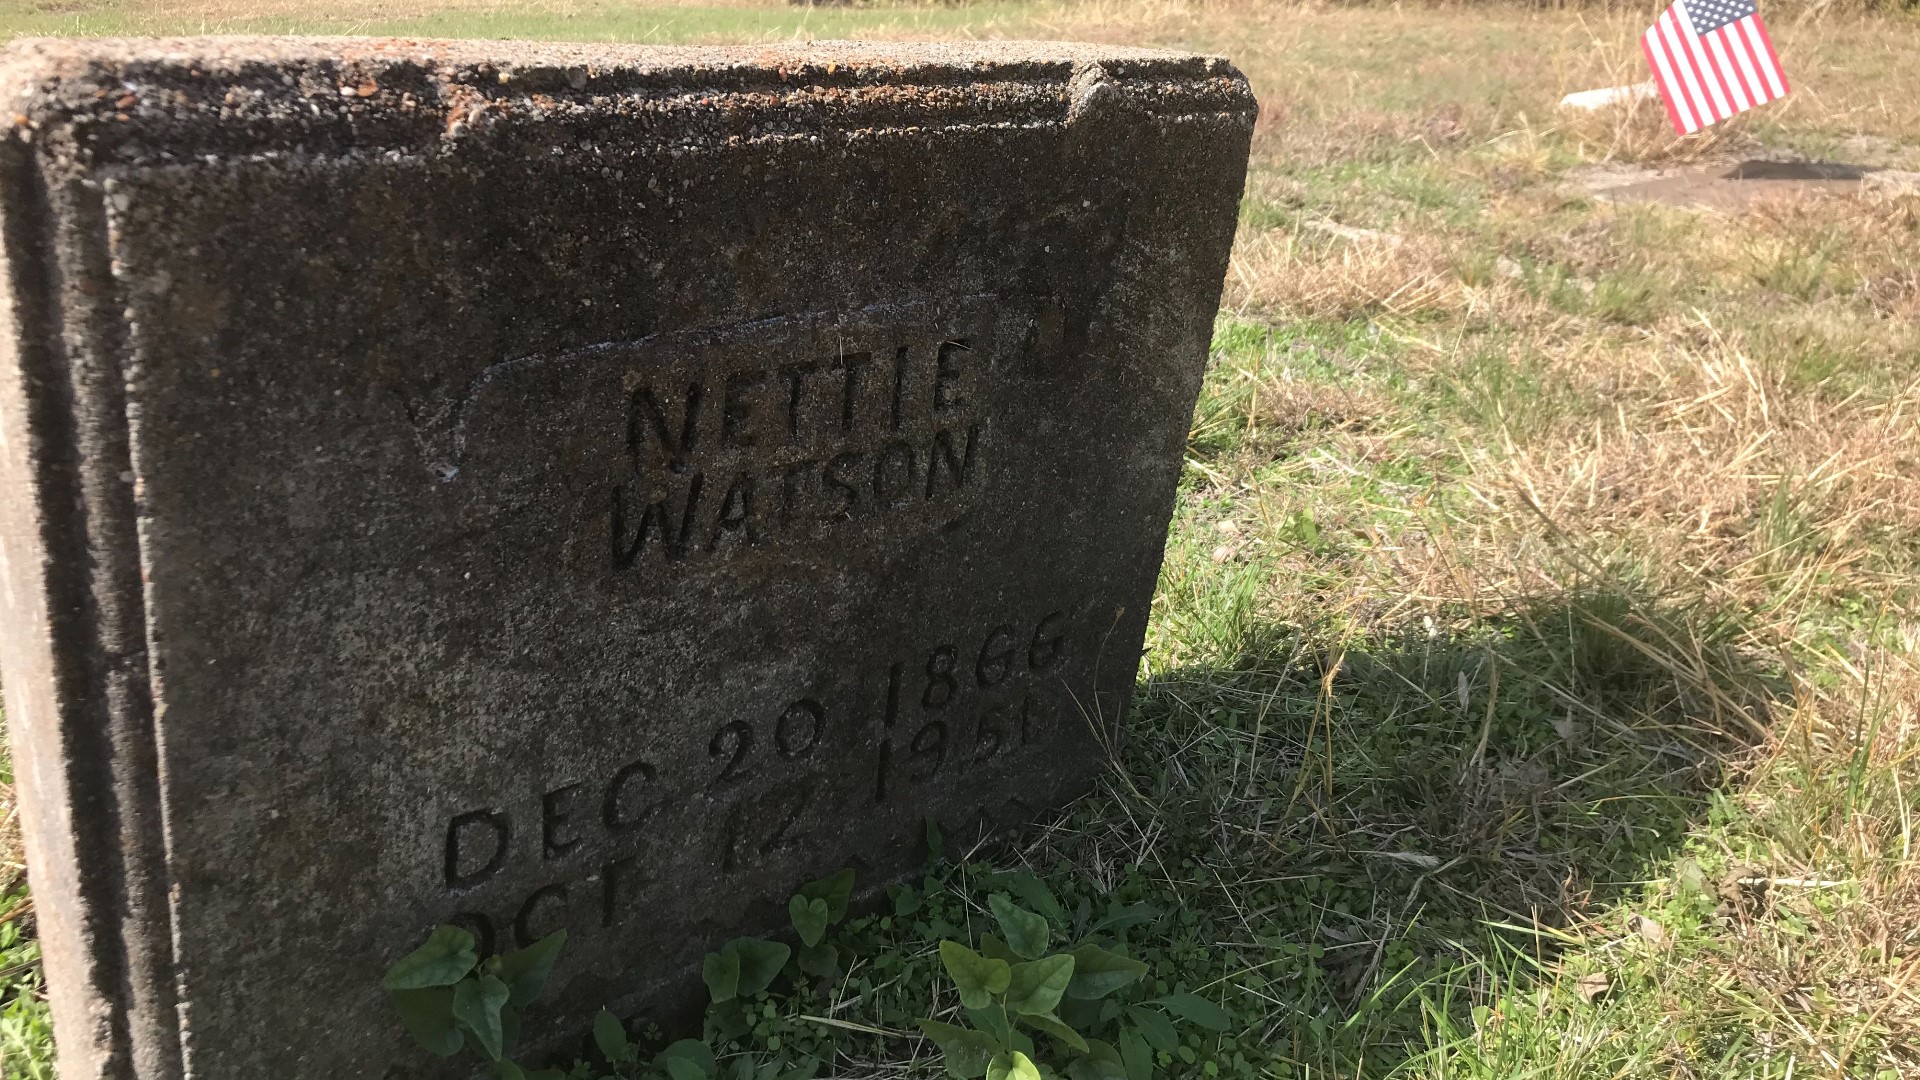 The Mart community is hoping to improve Evergreen Cemetery, a predominantly African-American cemetery just west of the town.